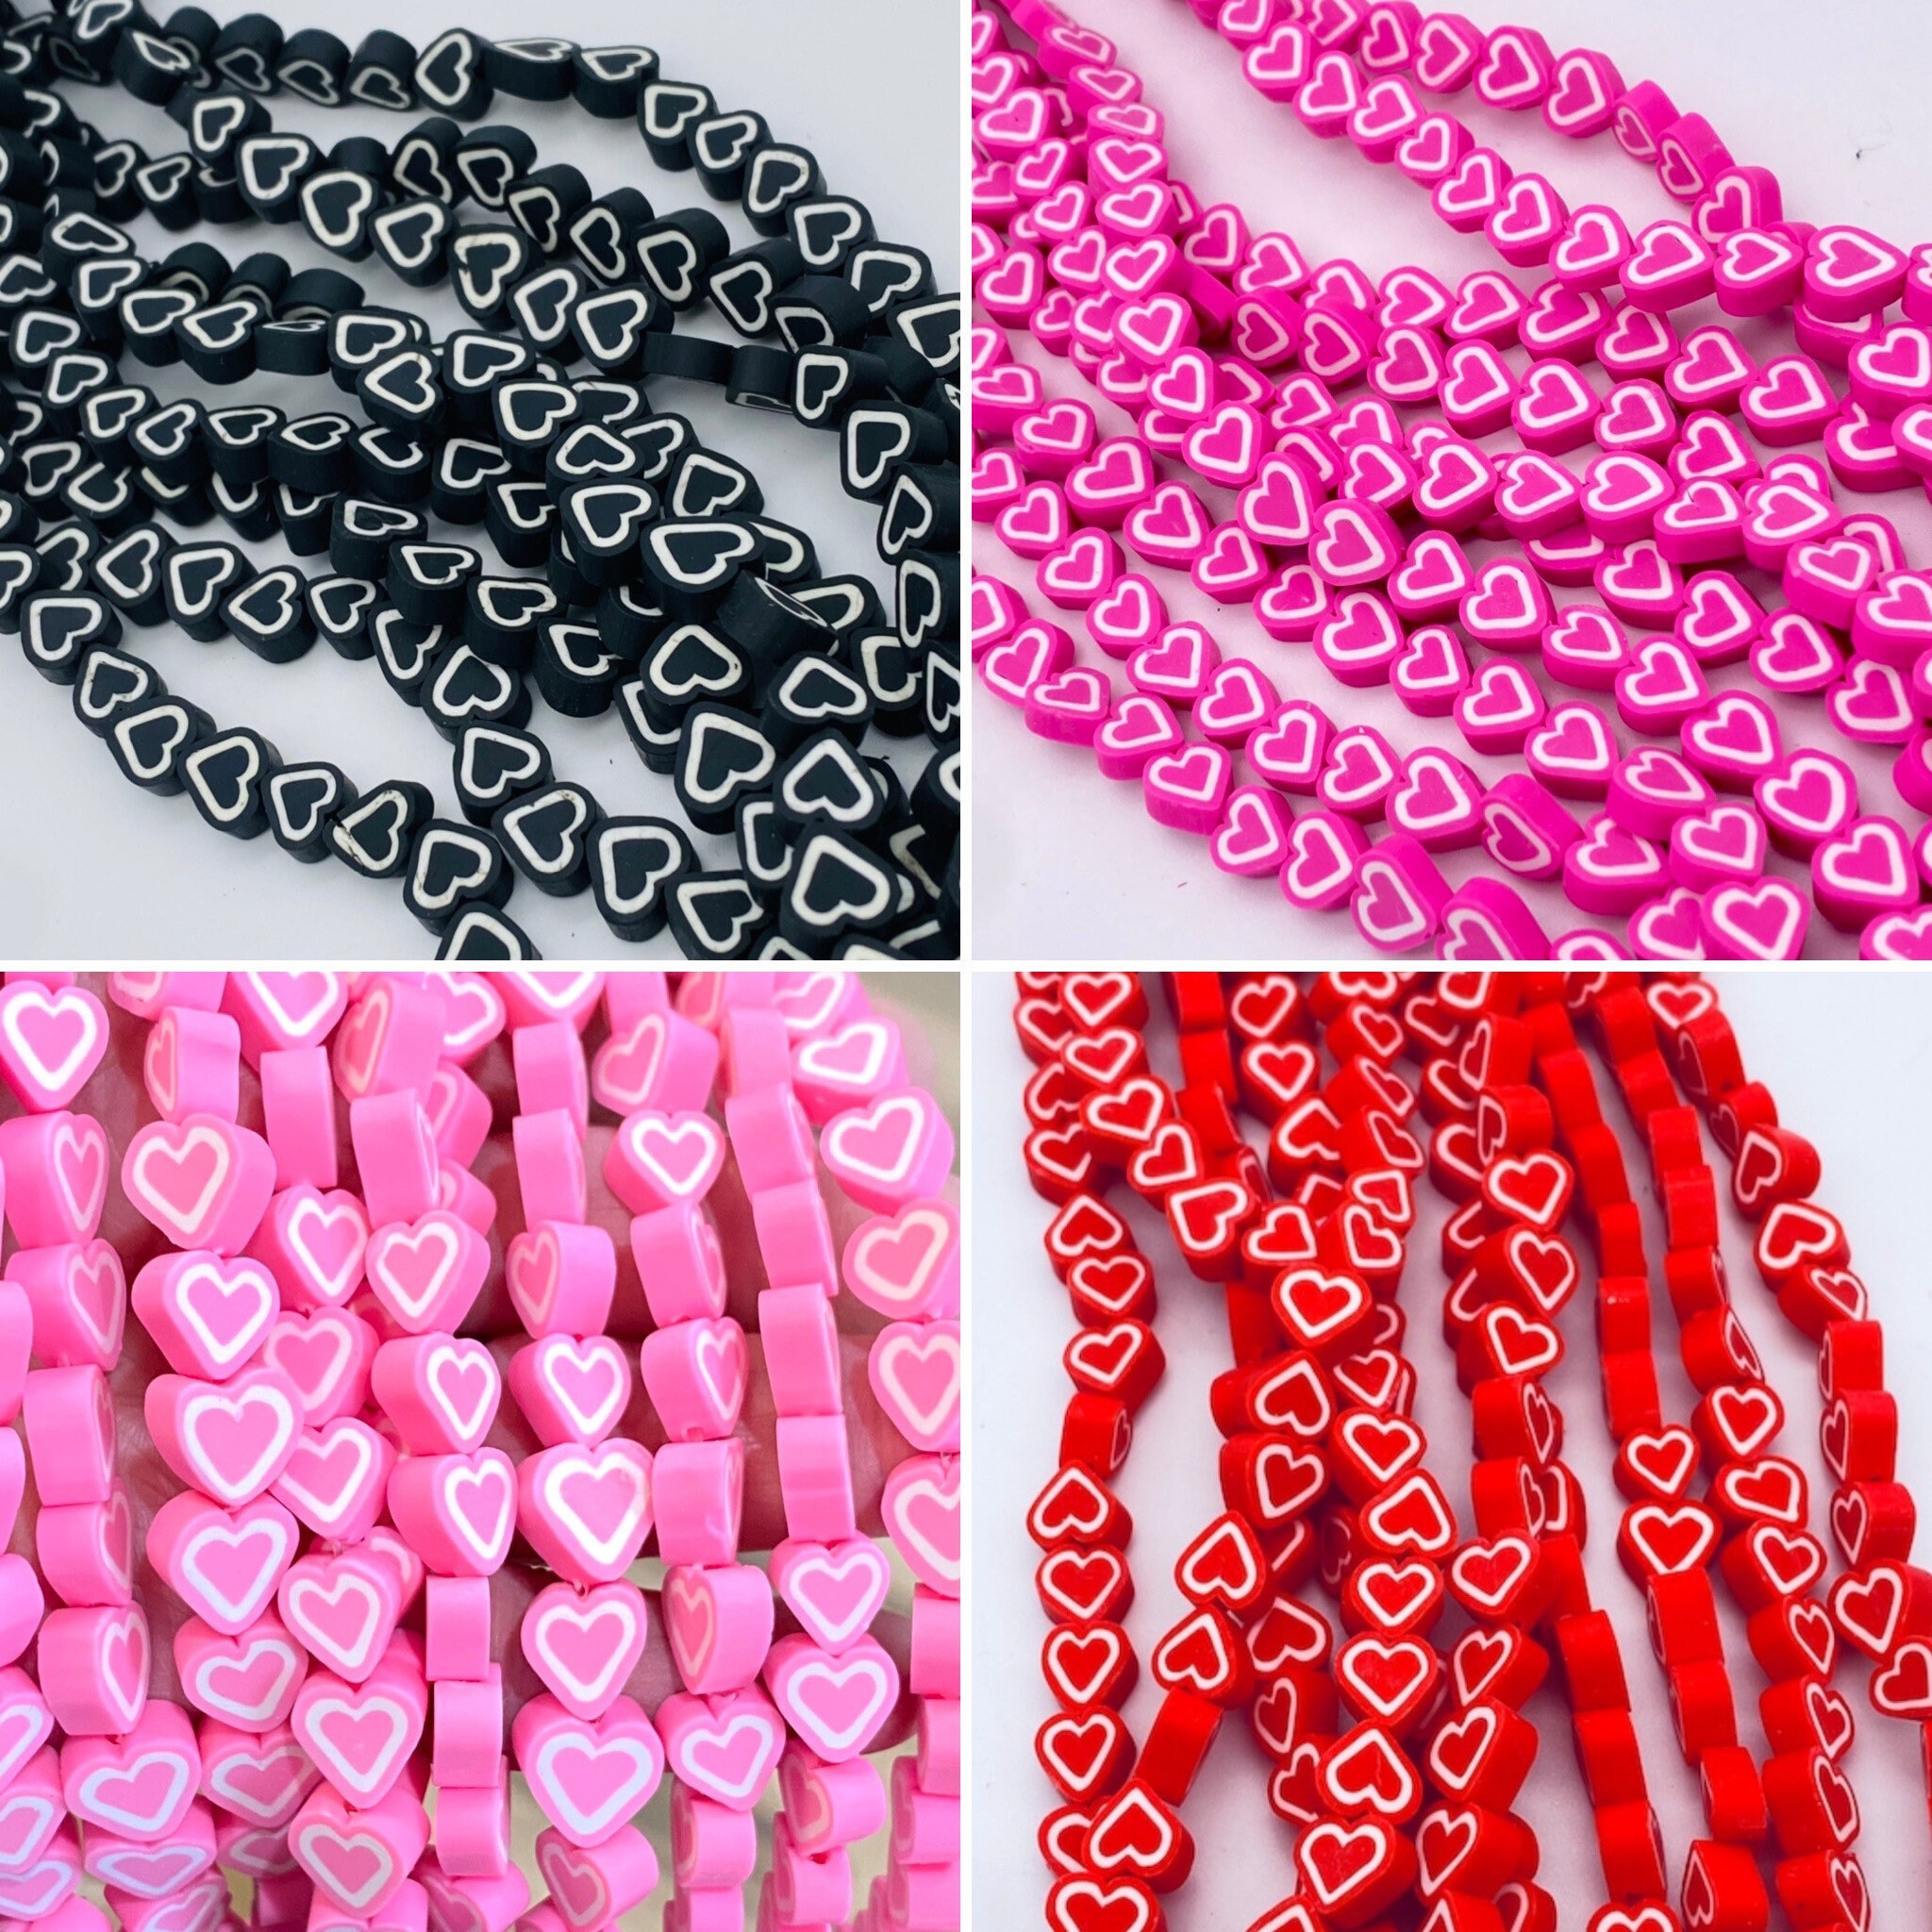 NVENF 3000PCS+ Valentine’s Day Clay Beads for Jewelry Making, Red Pink Polymer Clay Heishi Beads, Enamel Heart Charms for Bracelet Necklace Earrings